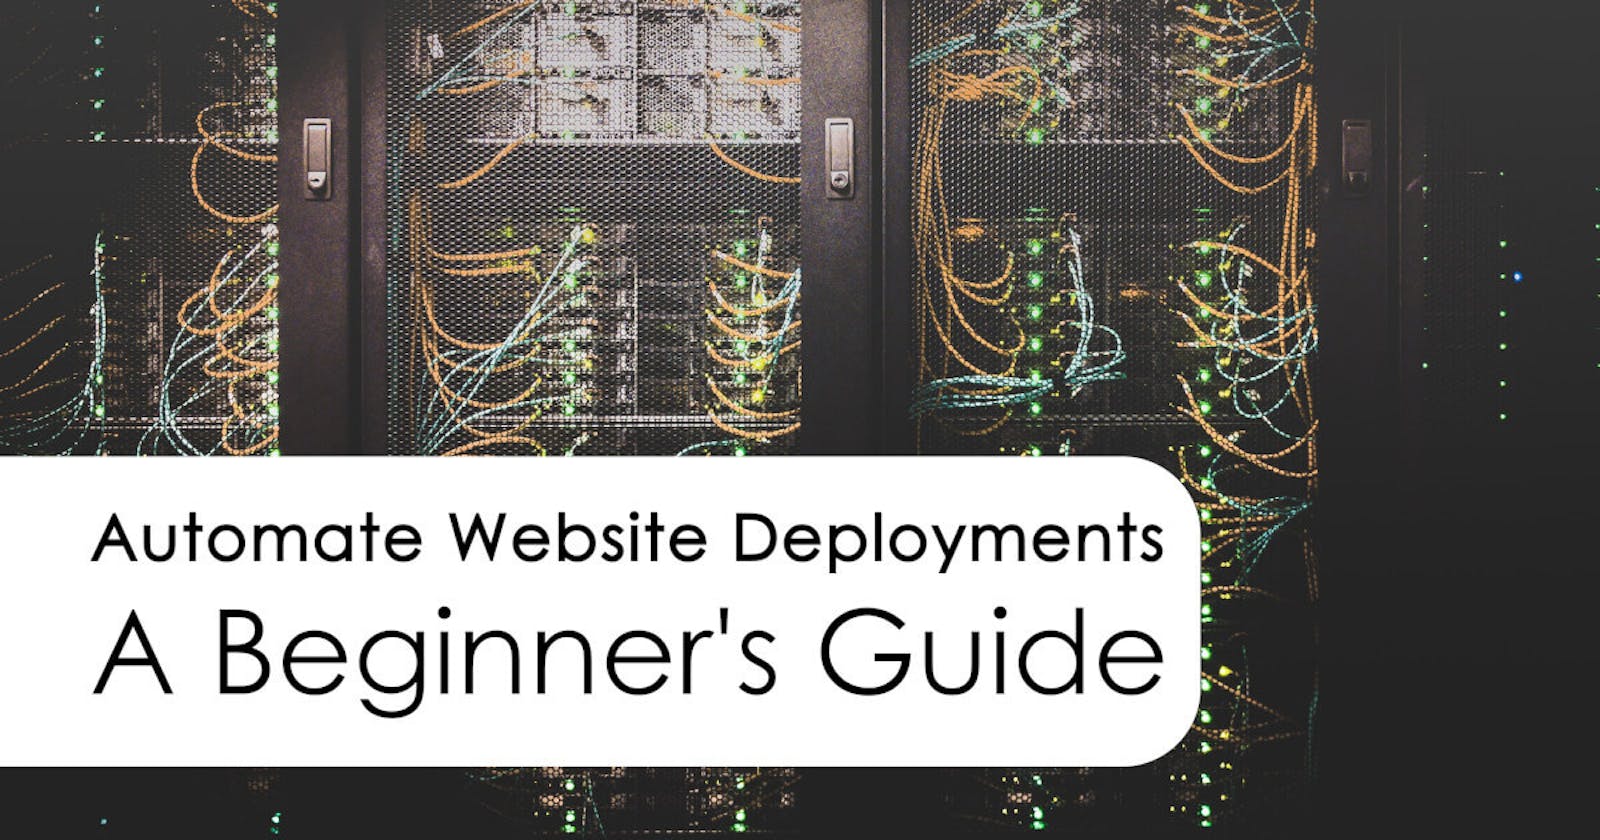 Streamline Website Deployment with This Comprehensive Beginner's Guide to Automation